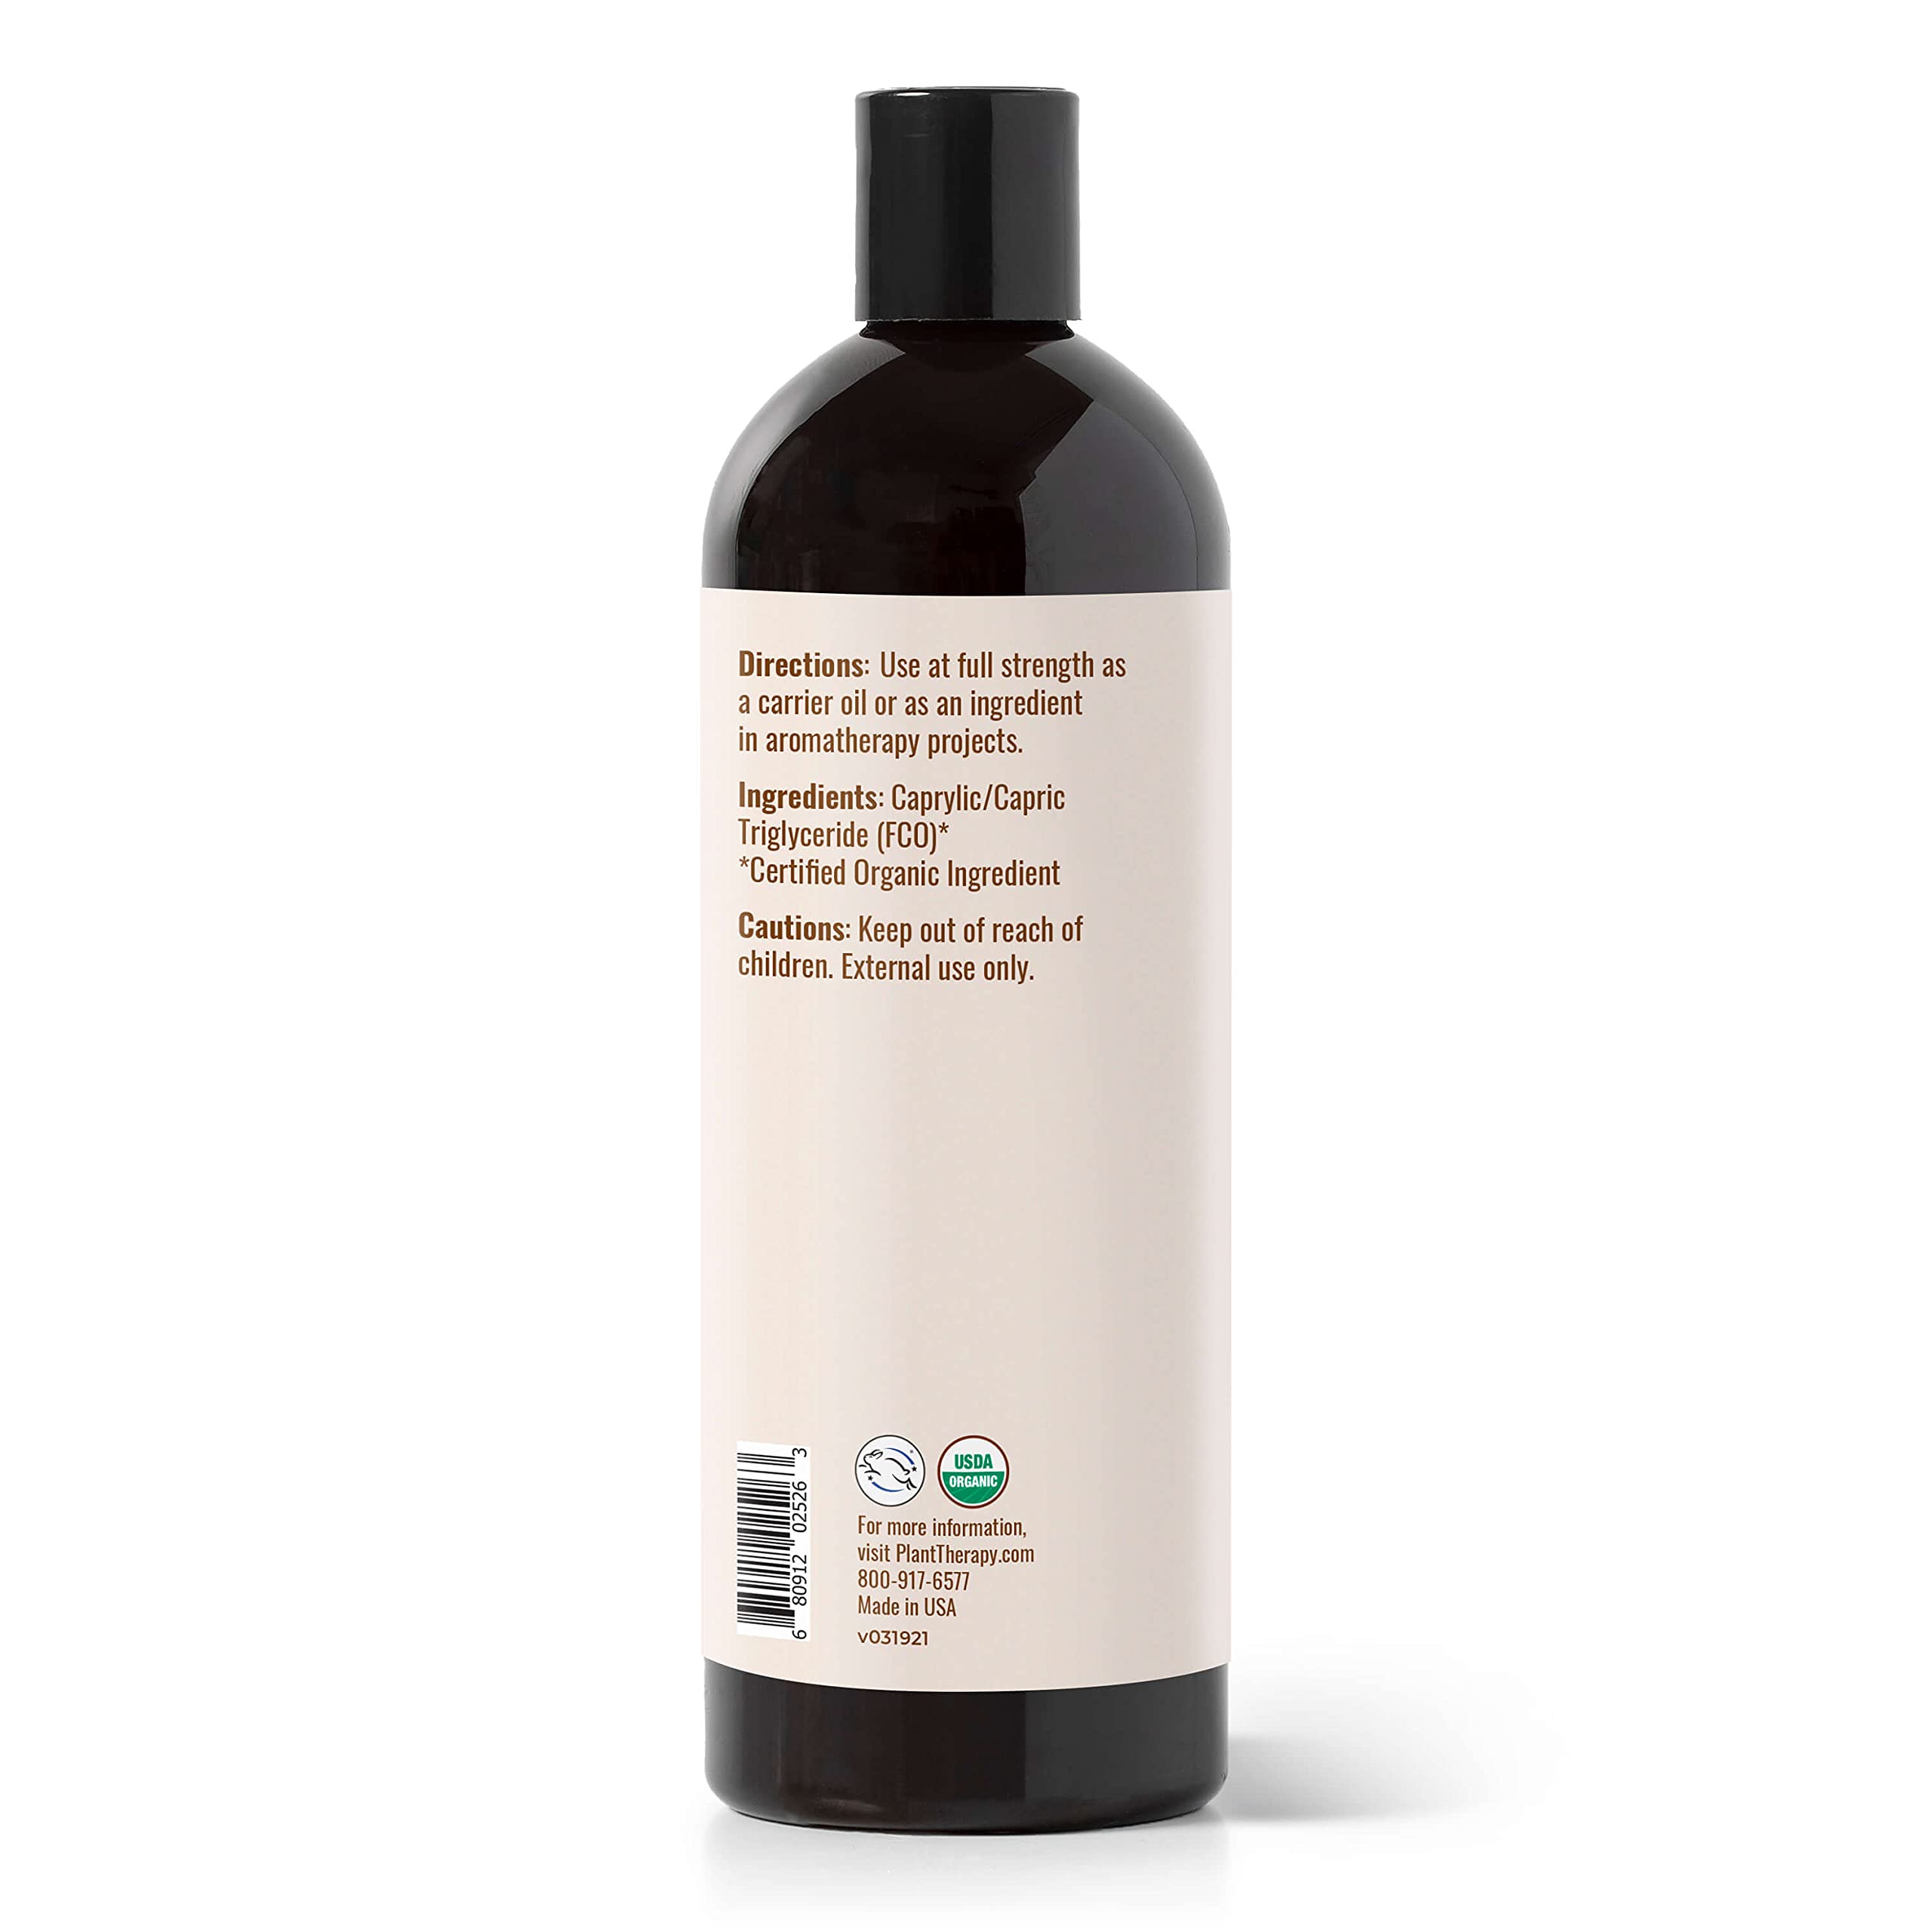 Plant Therapy Organic Fractionated Coconut Oil for Skin, Hair, Body 100% Pure, USDA Certified Organic, Natural Moisturizer, Massage & Aromatherapy Liquid Carrier Oil 16 oz